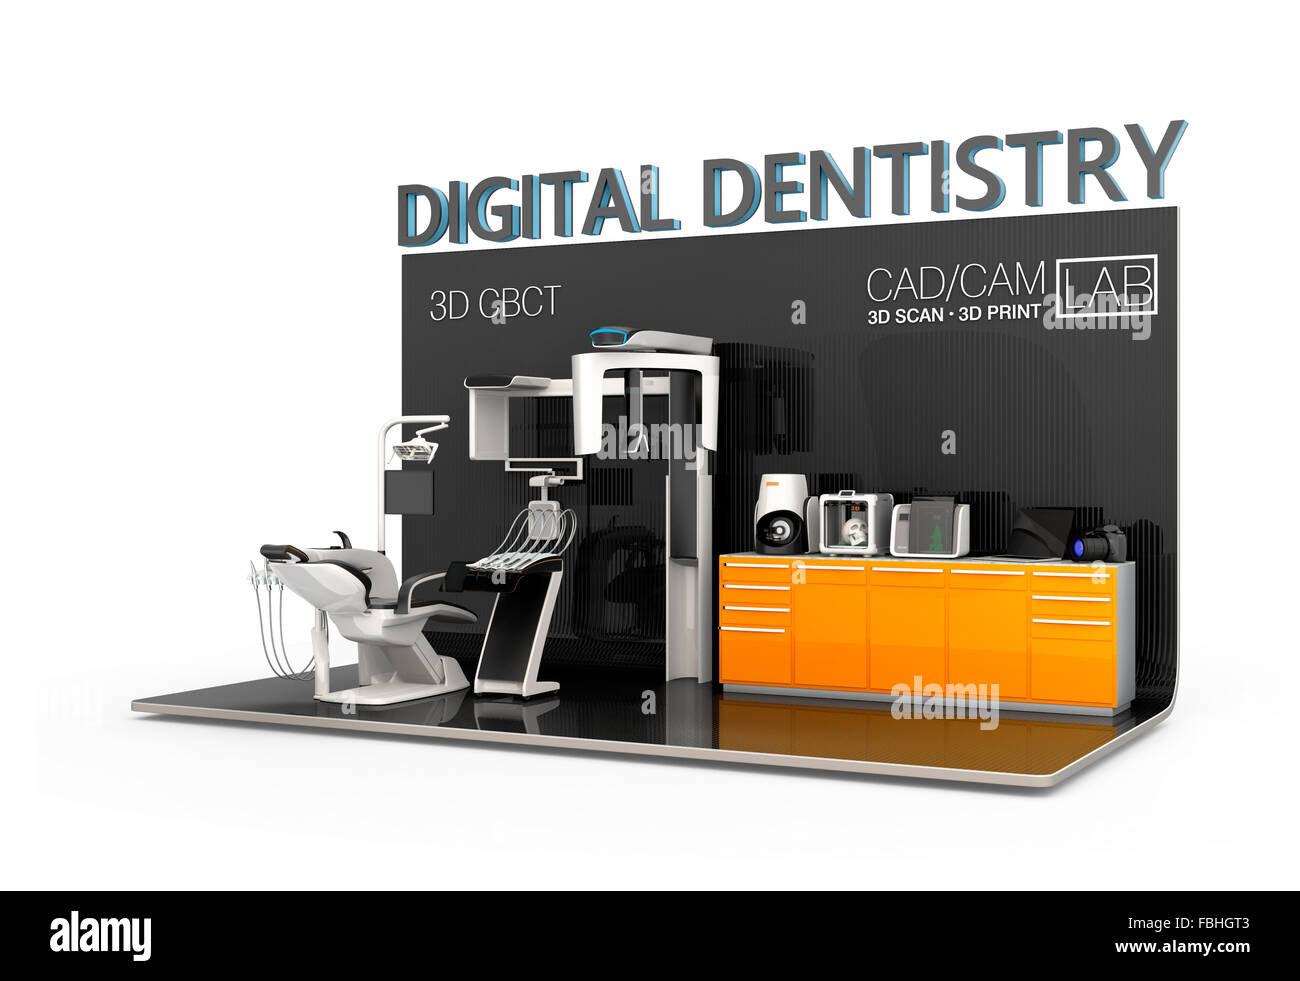 Digital dentistry concept. Scan patient facial data by dental CT, send to chair side or lab for 3D print. Stock Photo